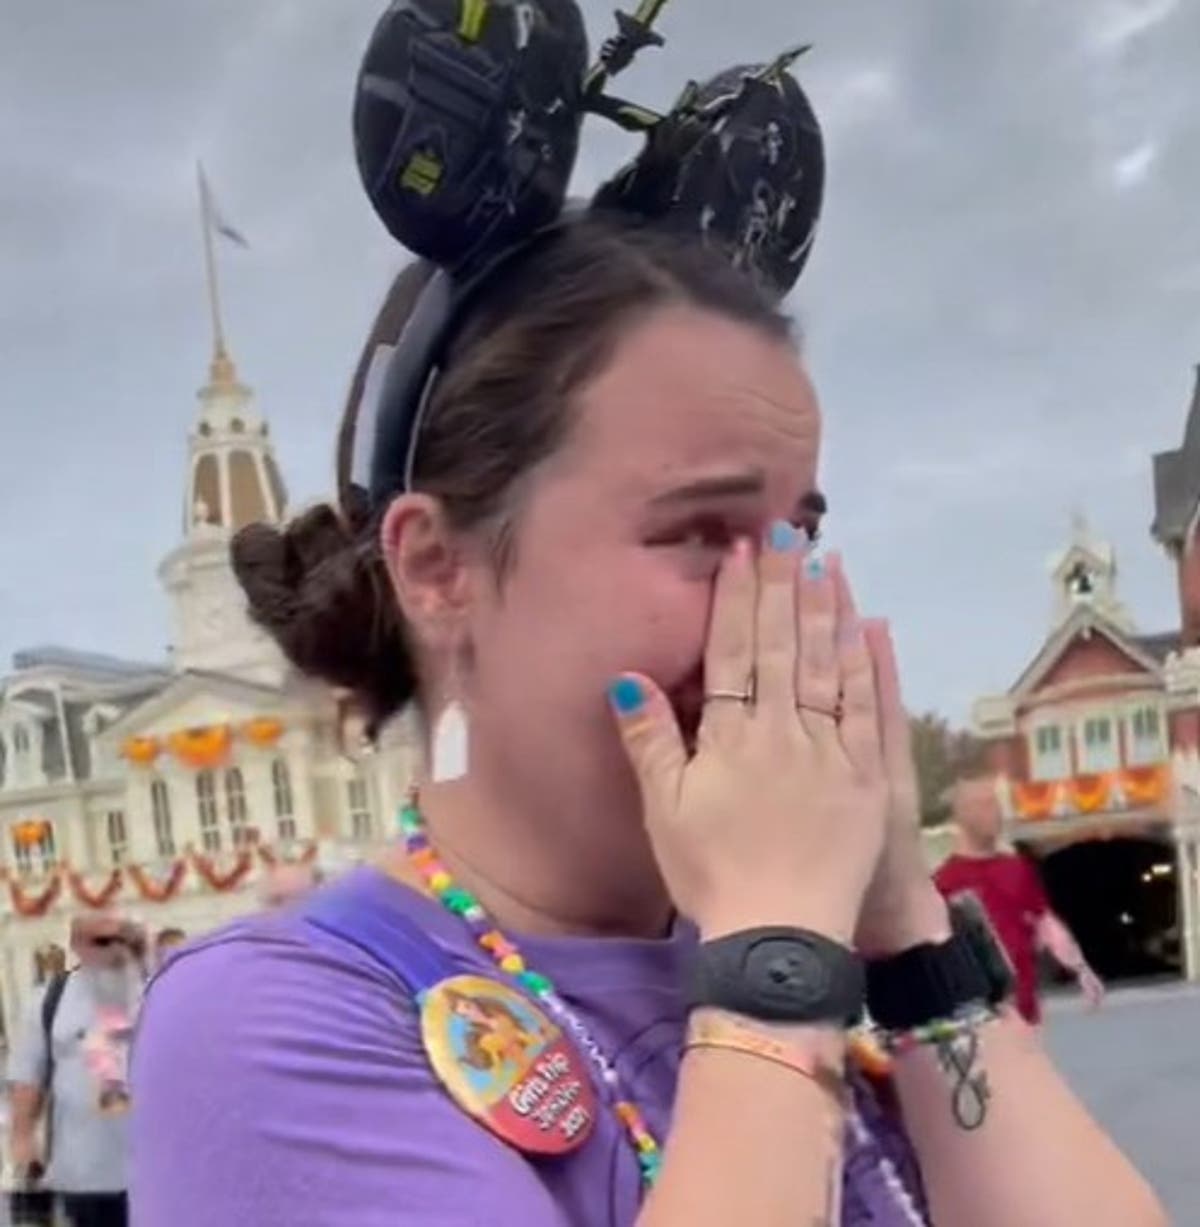 ‘Like a religion’: Viral video of sobbing woman reignites debate over ‘Disney adults’